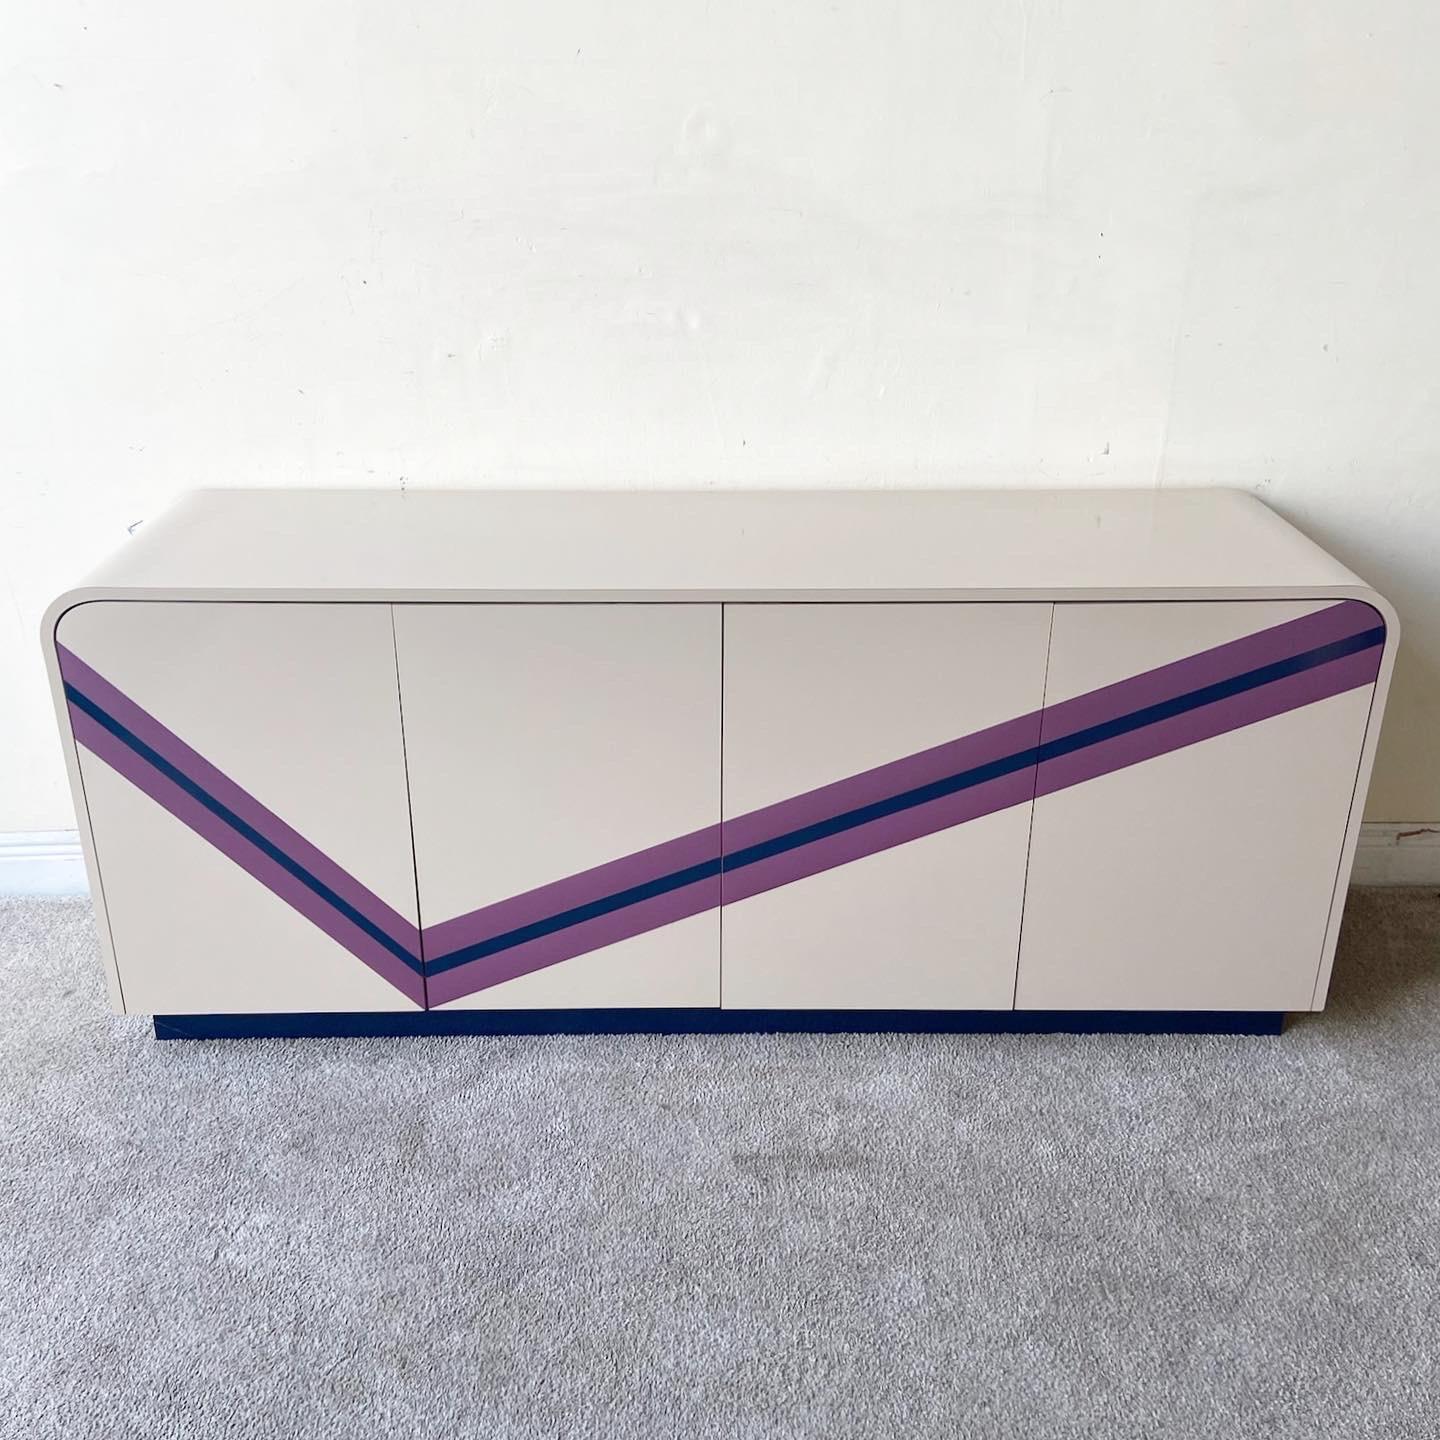 Post-Modern Postmodern Tan Lacquer Laminate Waterfall Credenza With Purple and Navy Blue Che